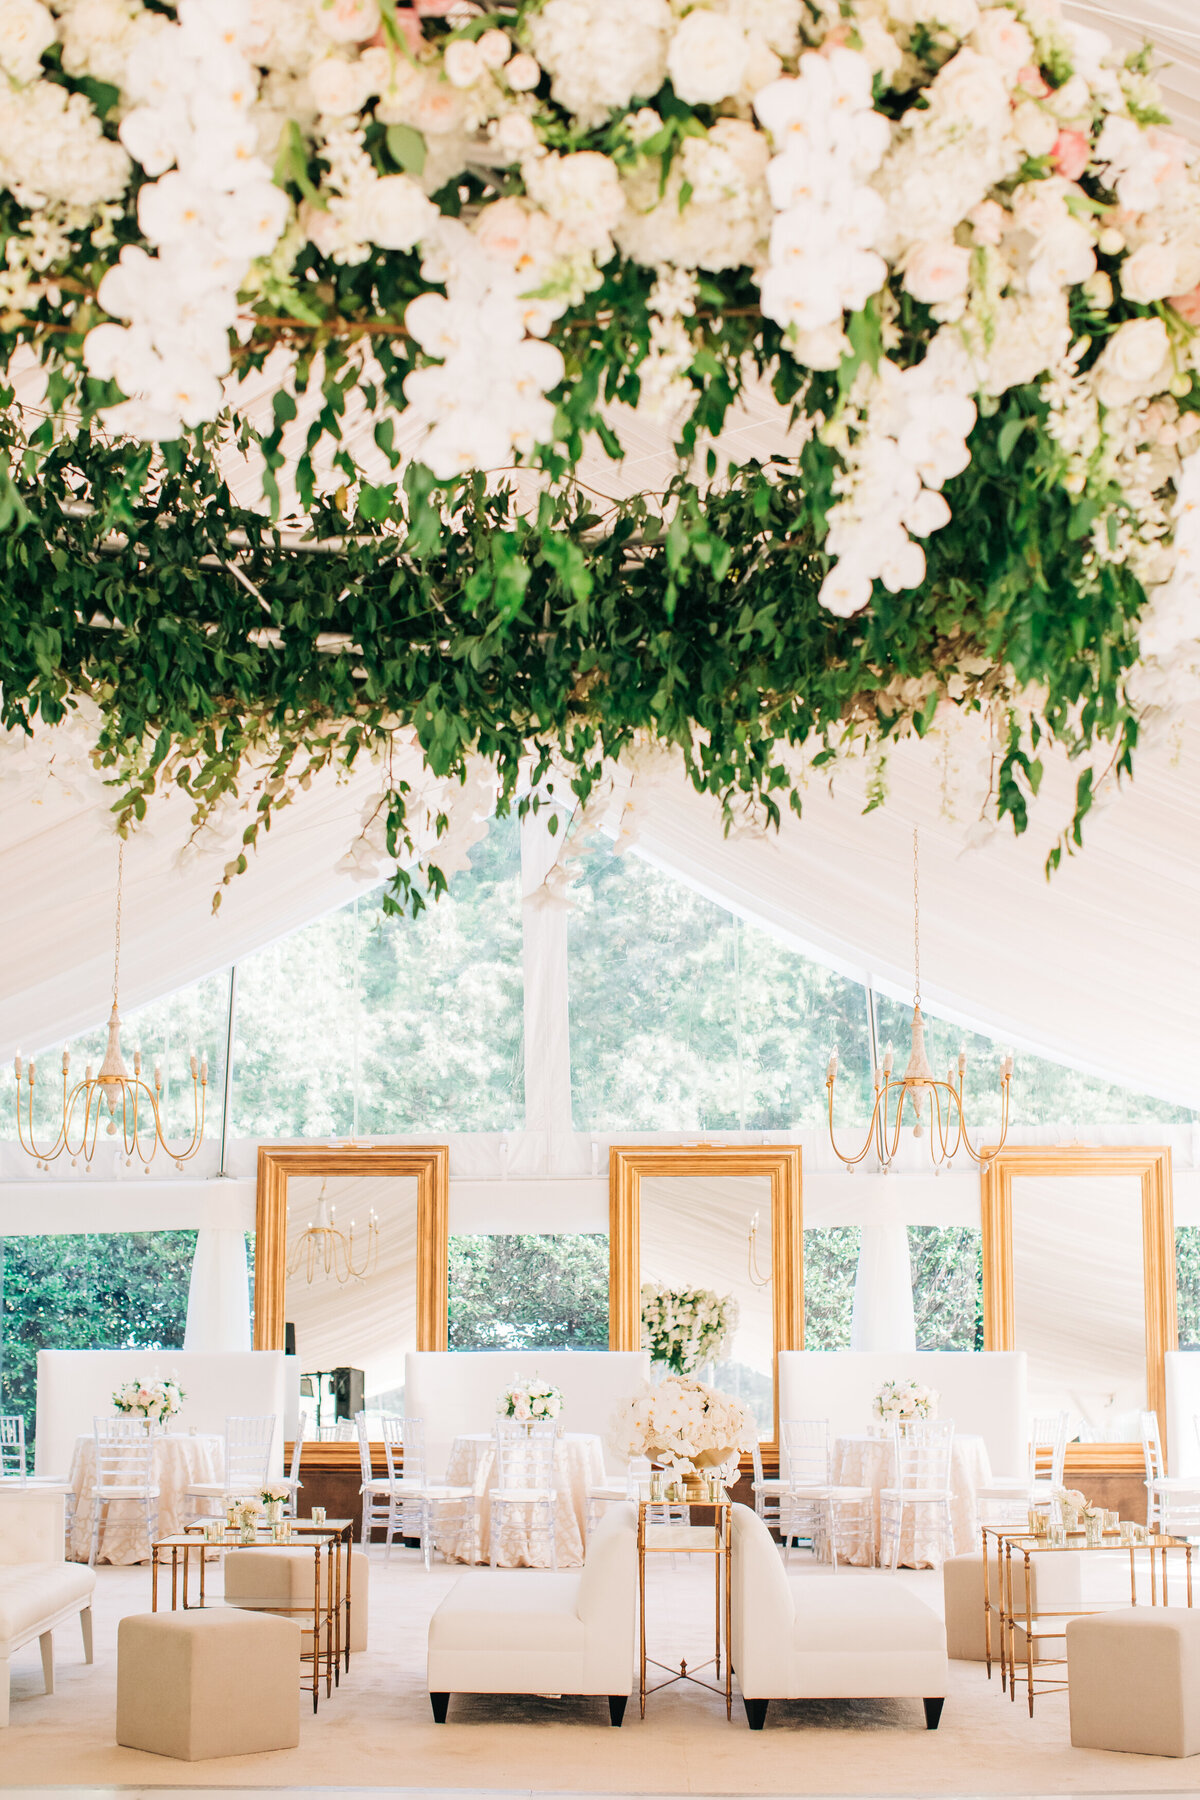 Tented wedding reception with white and gold couches and flowers hanging from the ceiling